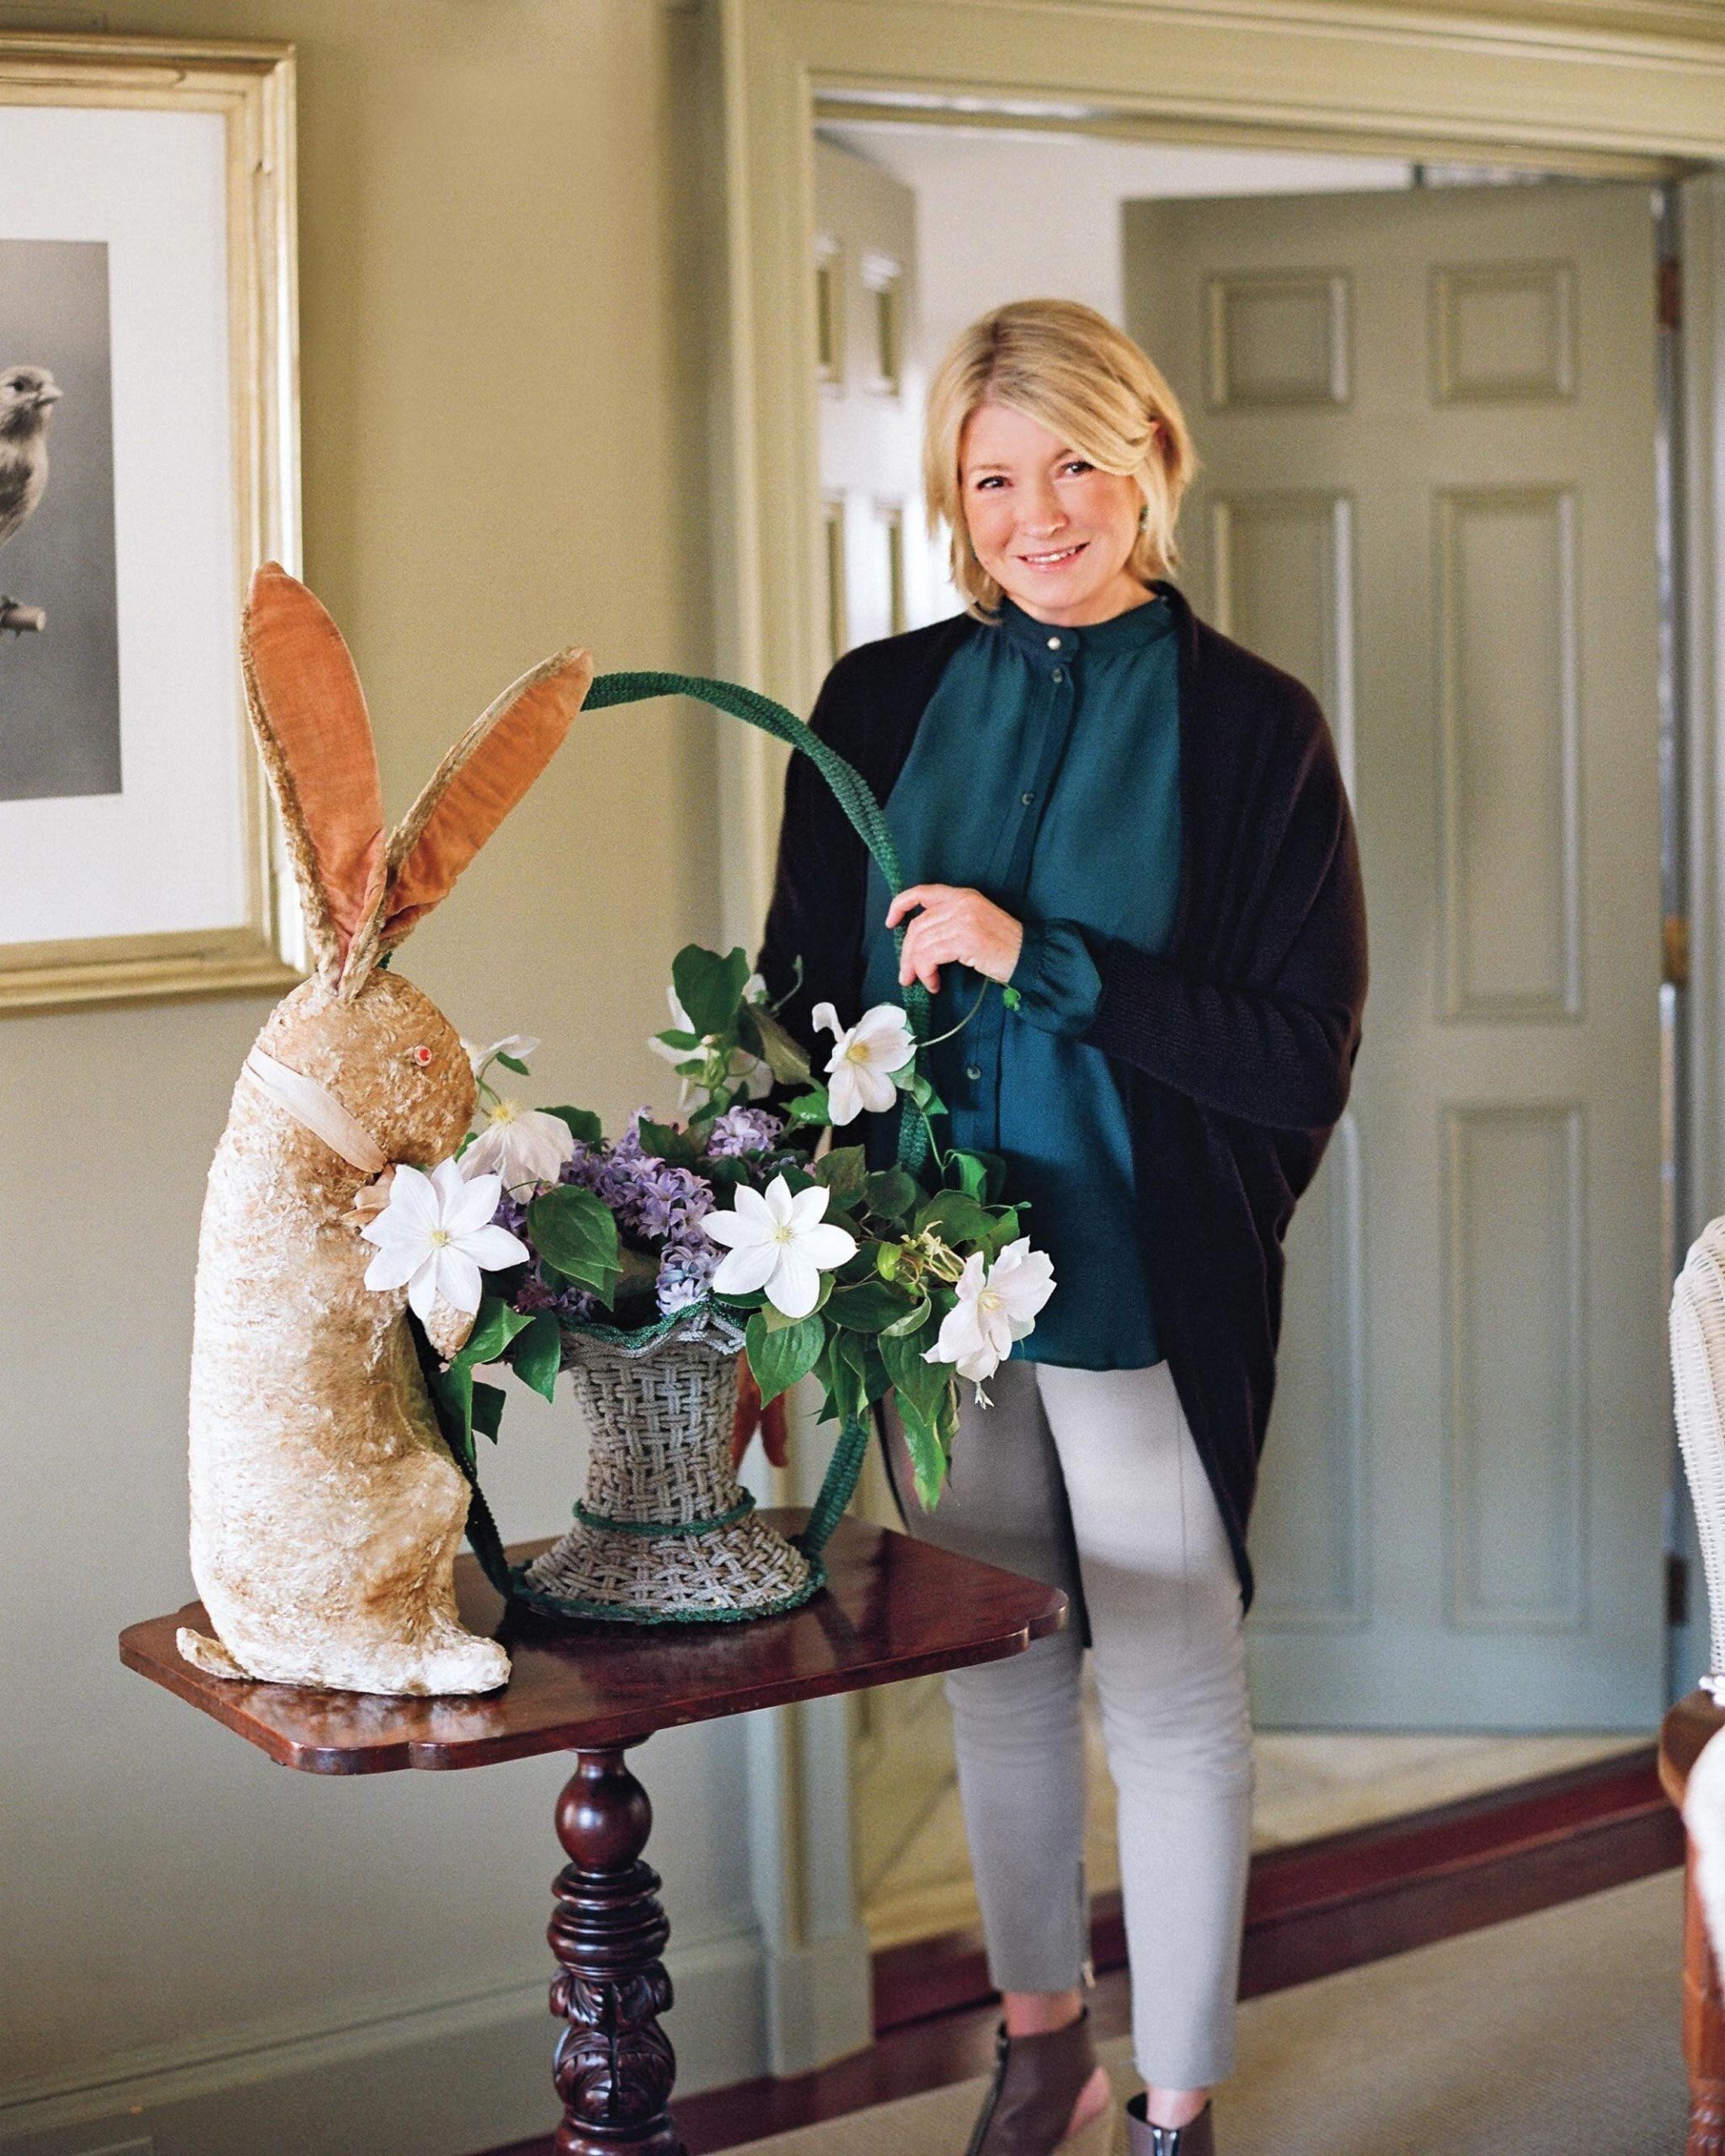 Martha Stewart Easter Dinner Menu
 Get Inspired by Martha s Russian Themed Easter Menu and